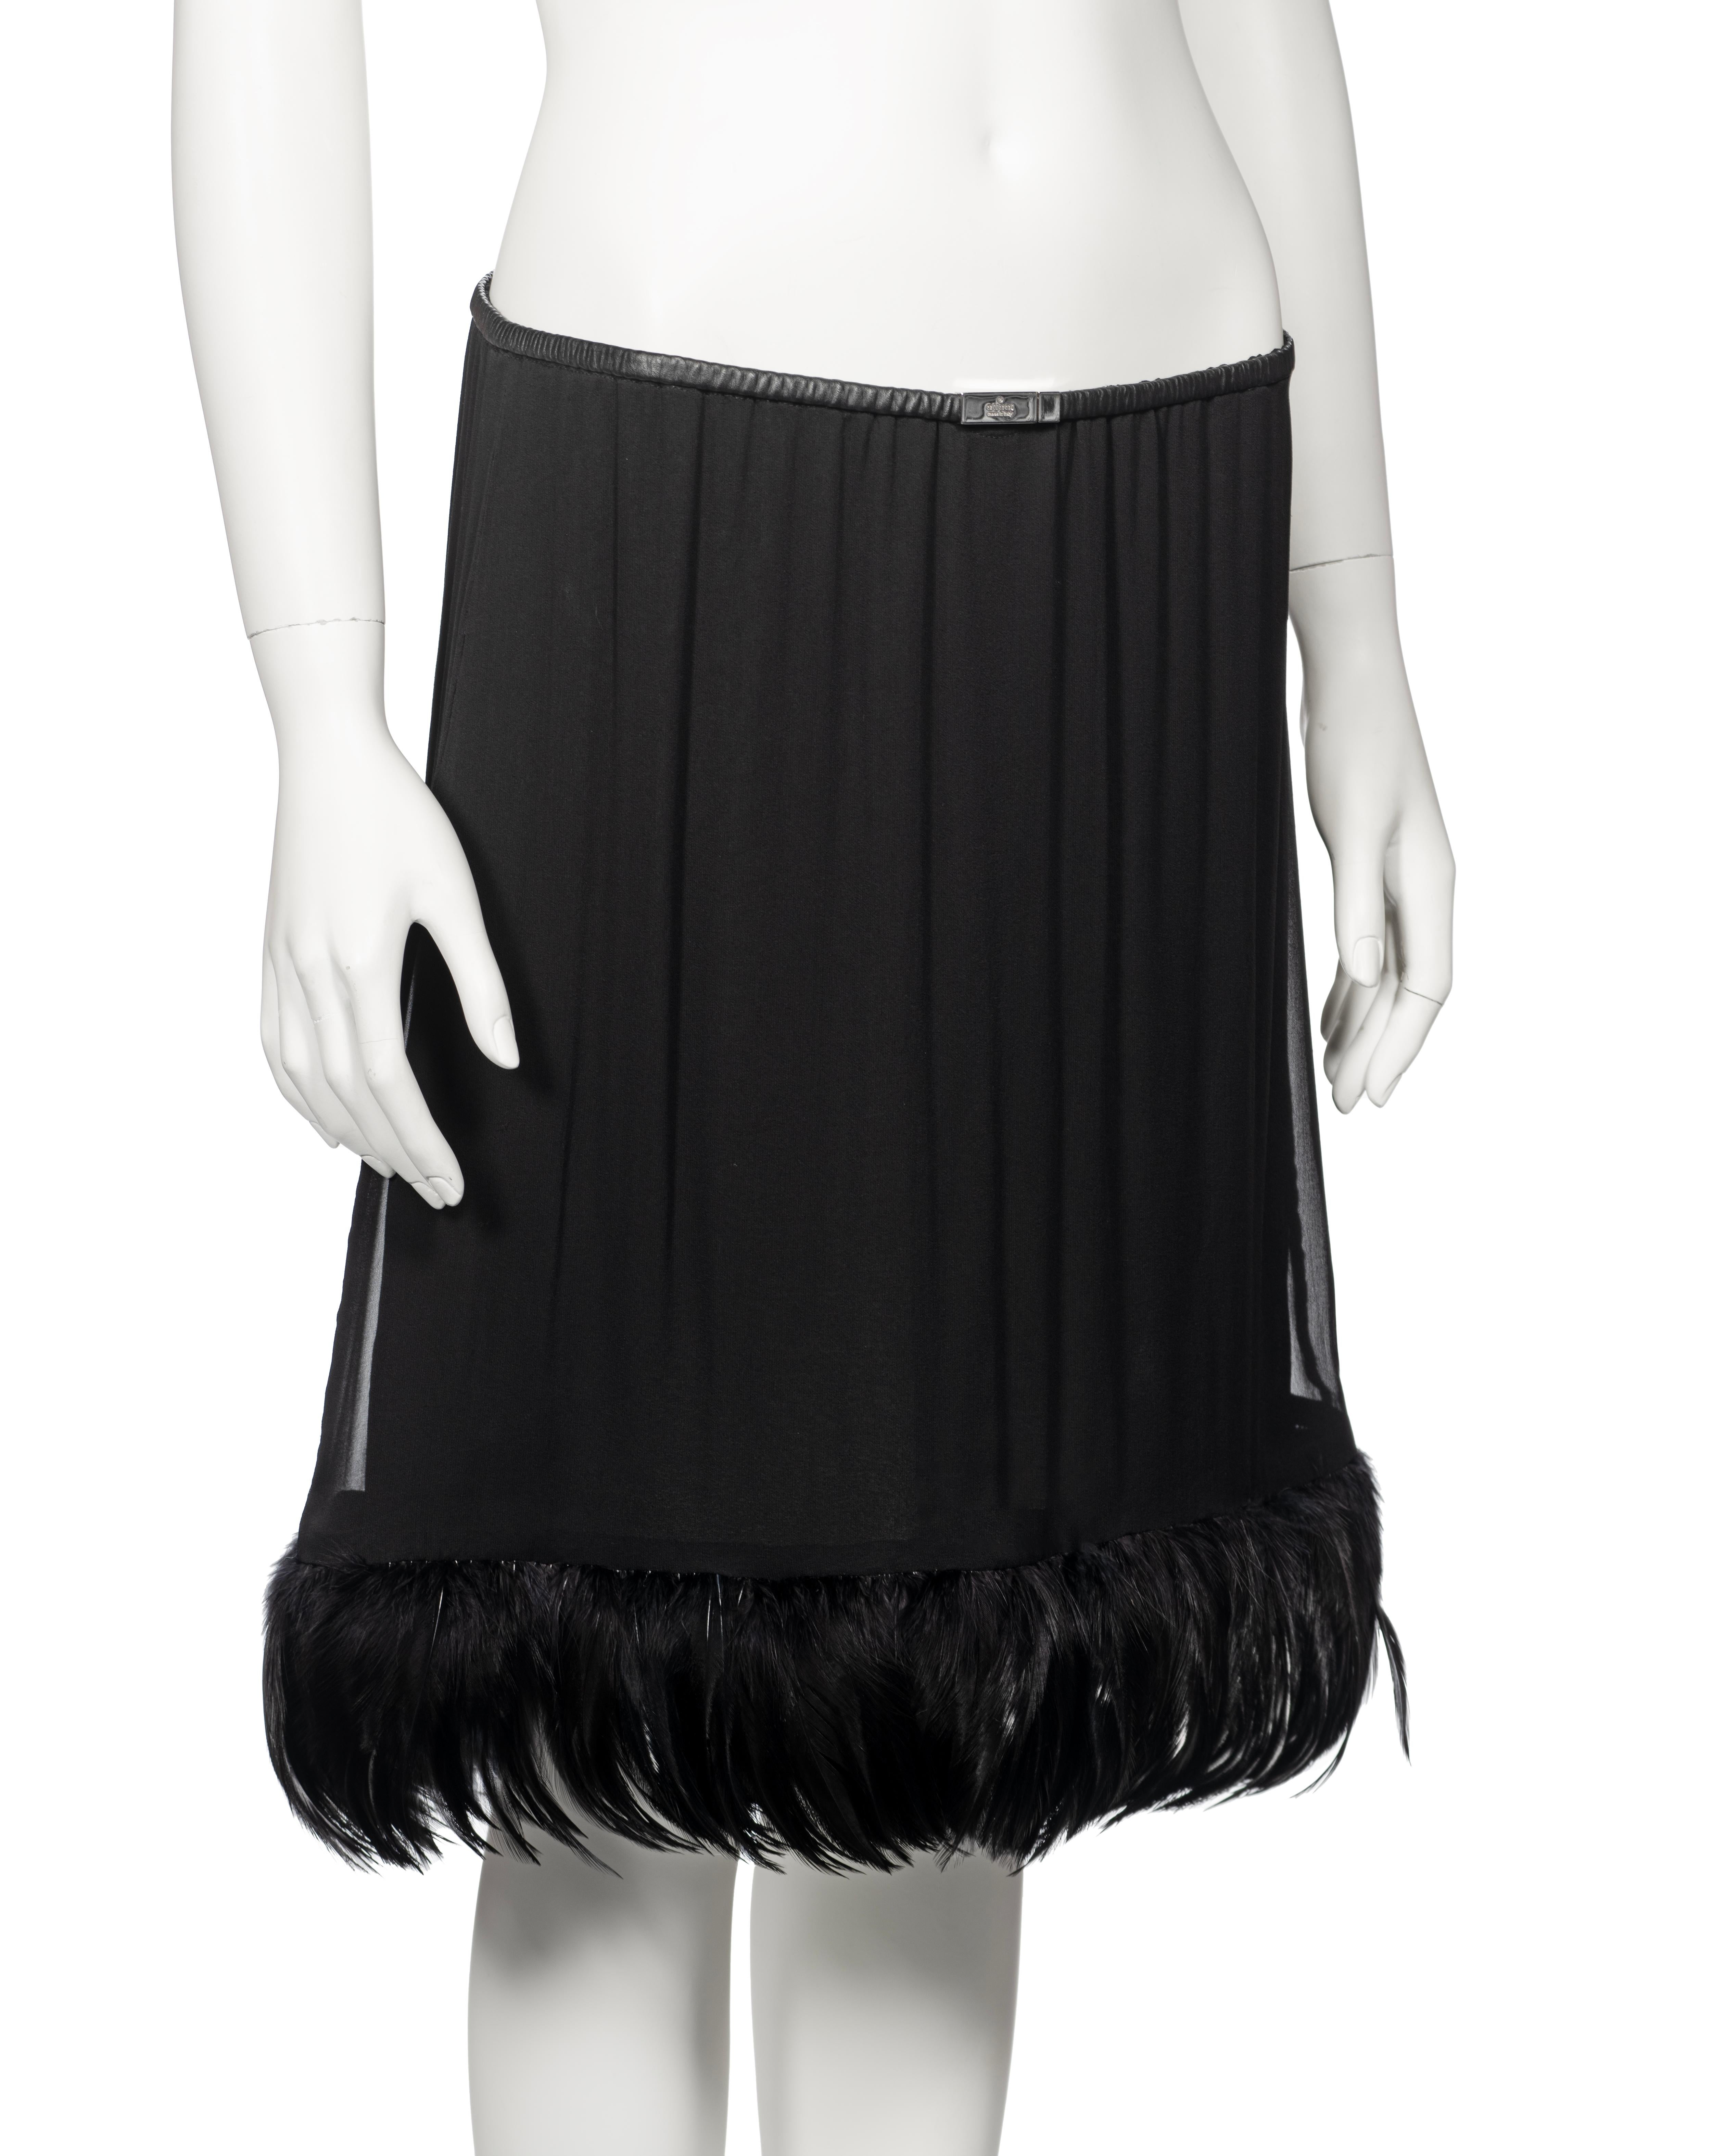 Gucci by Tom Ford Black Silk Evening Skirt With Feathers, ss 1999 For Sale 3